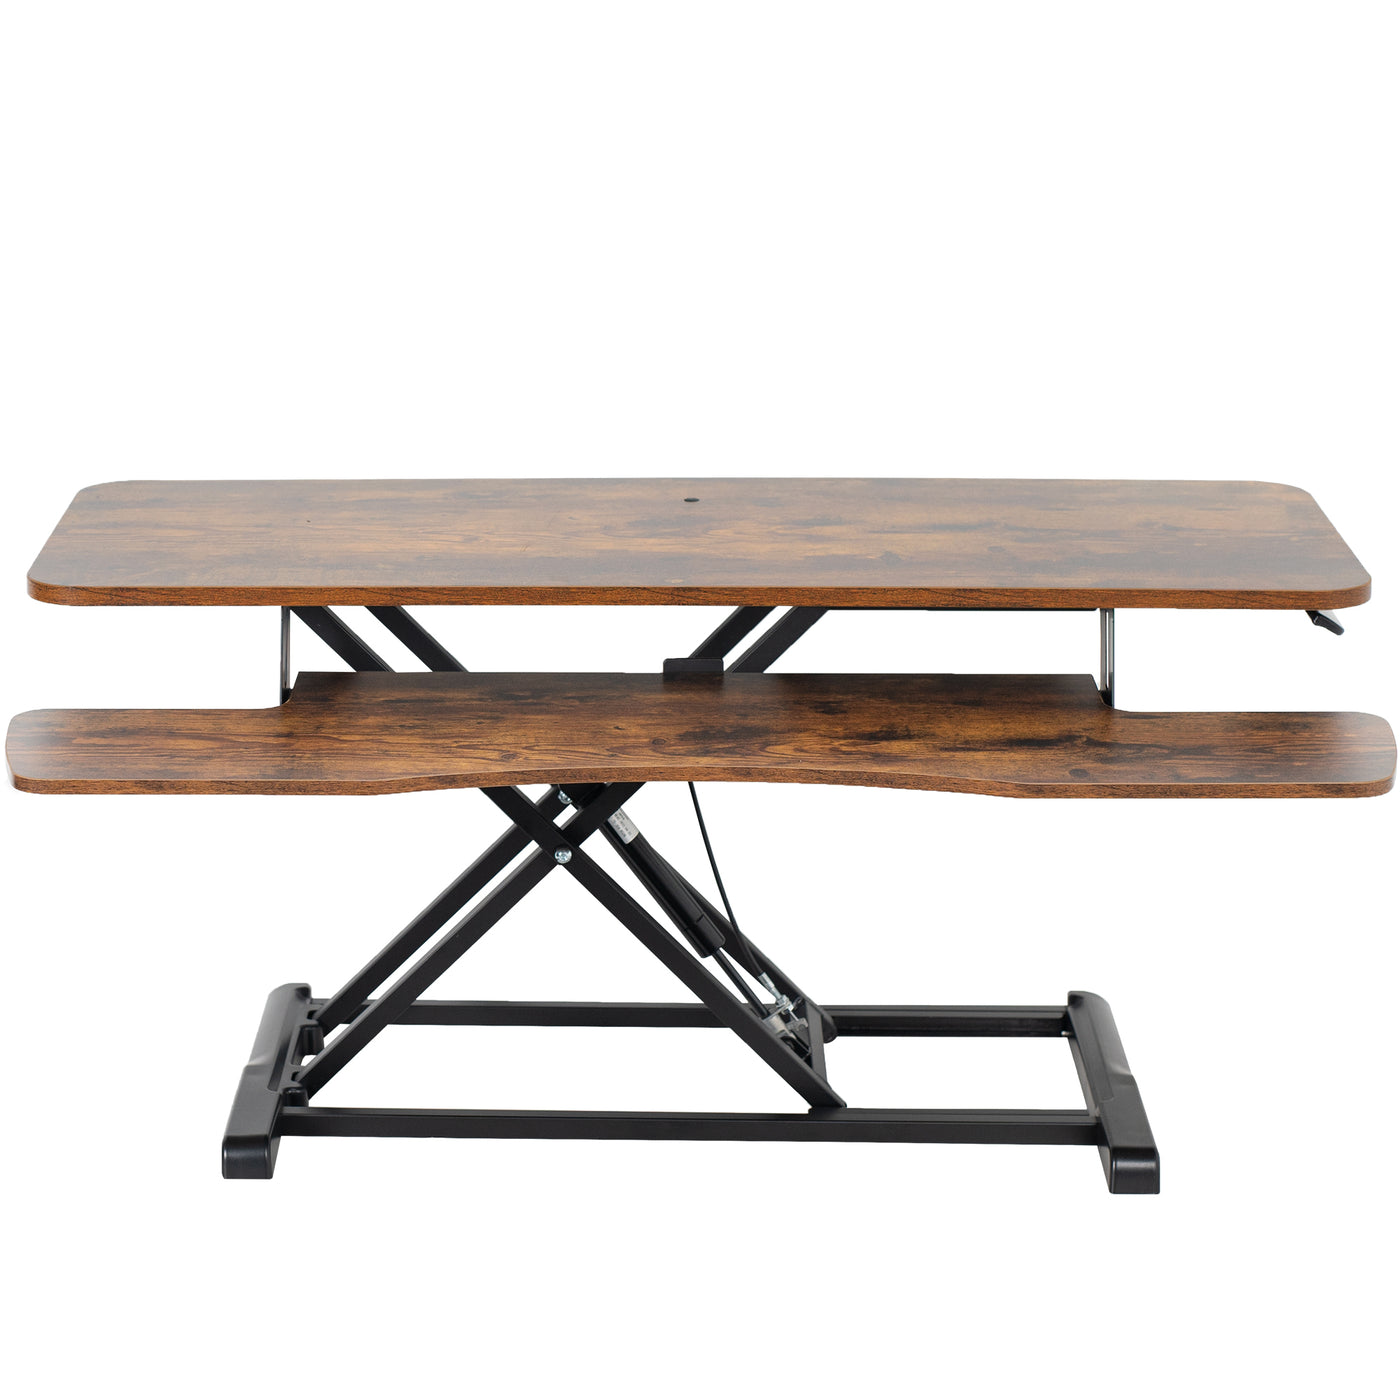 Rustic ajustable sit-to-stand table-top desk riser. 